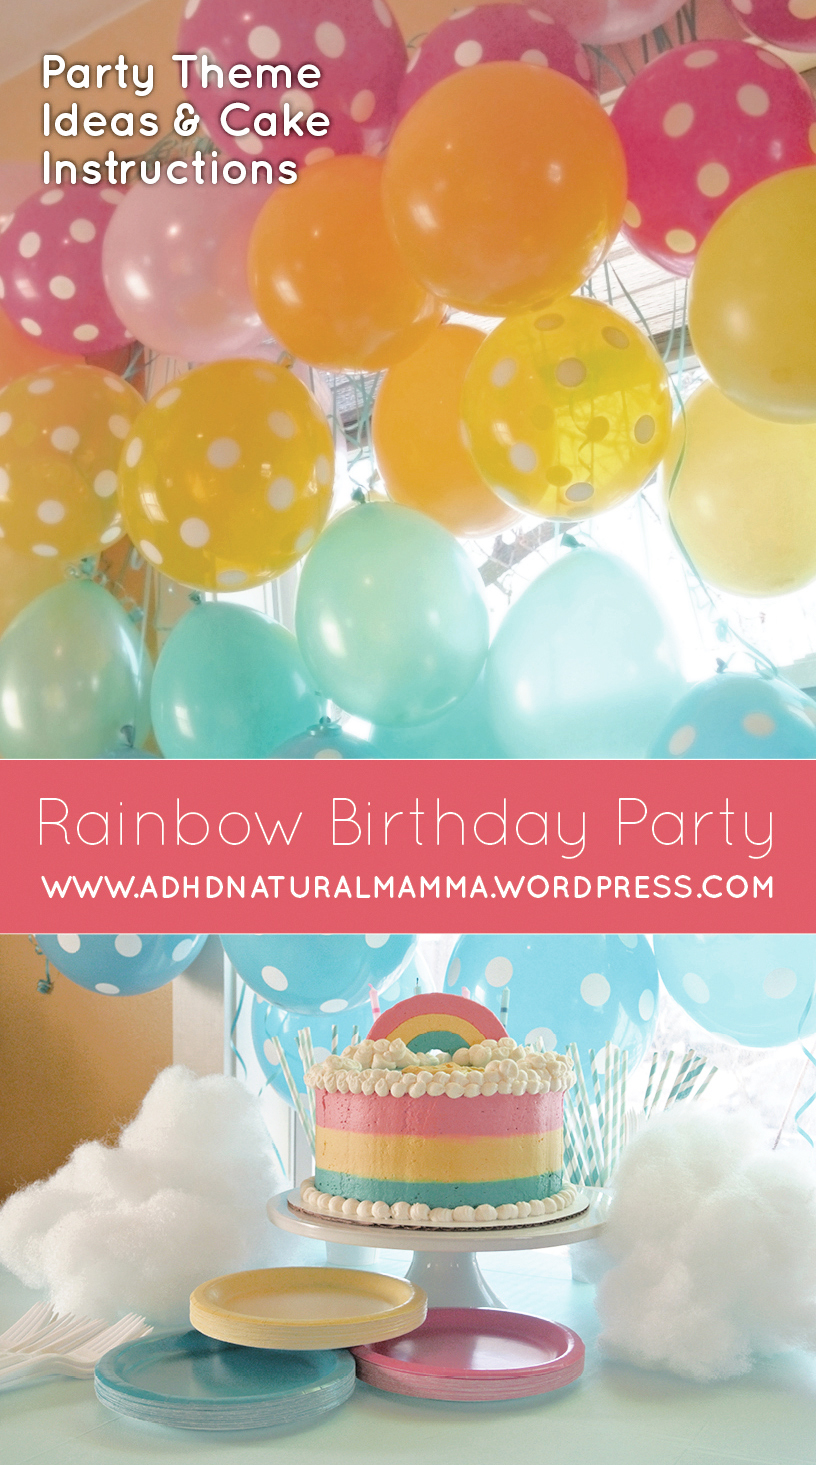 Rainbow or unicorn birthday party for girls, party ideas and gluten free cake recipe